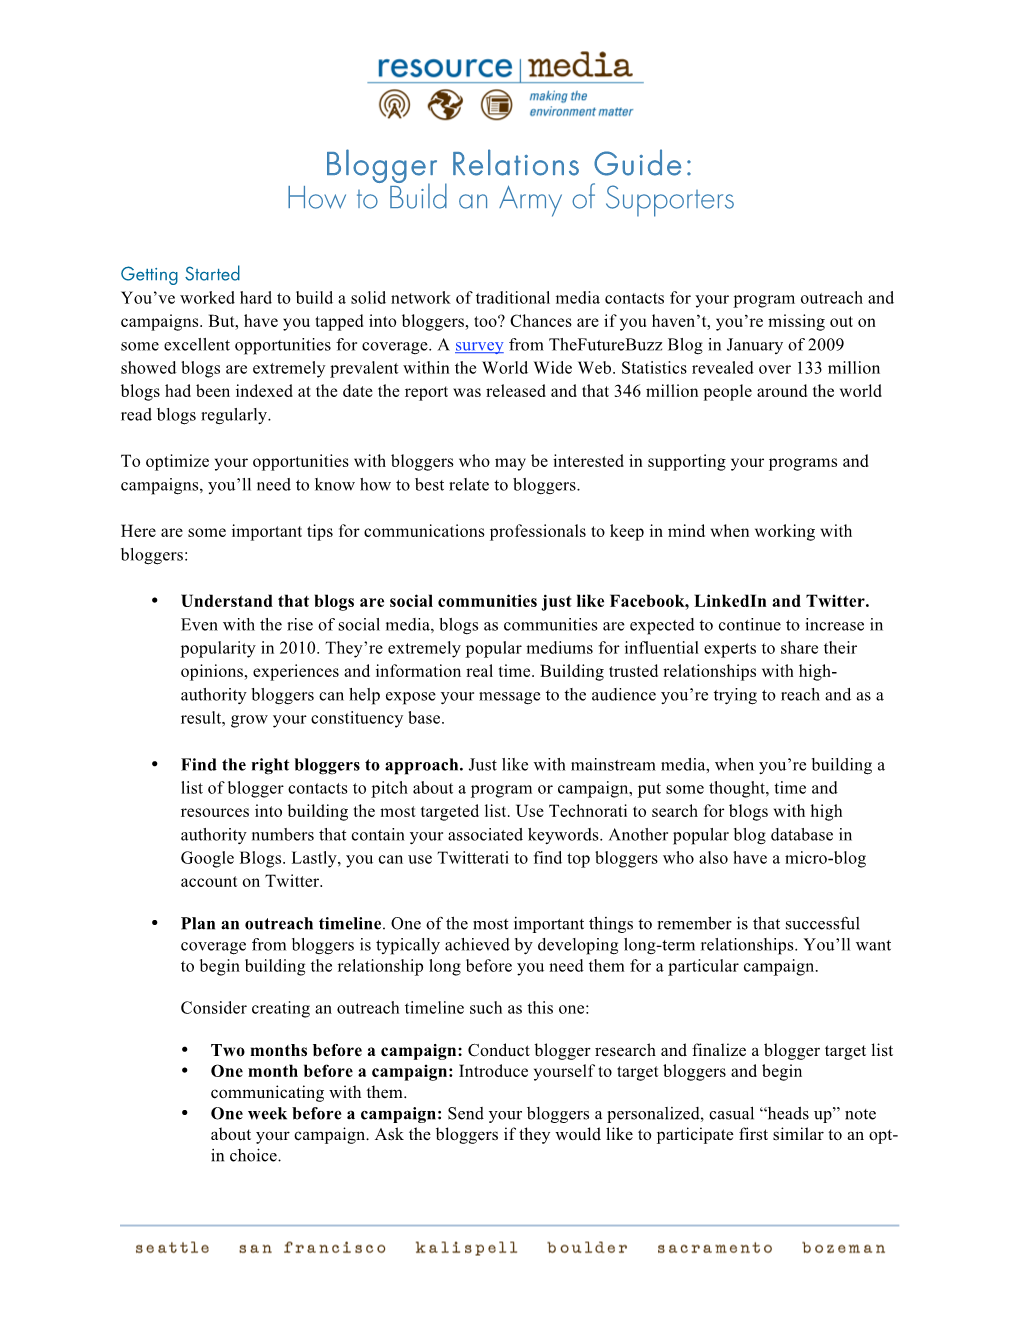 Blogger Relations Guide: How to Build an Army of Supporters